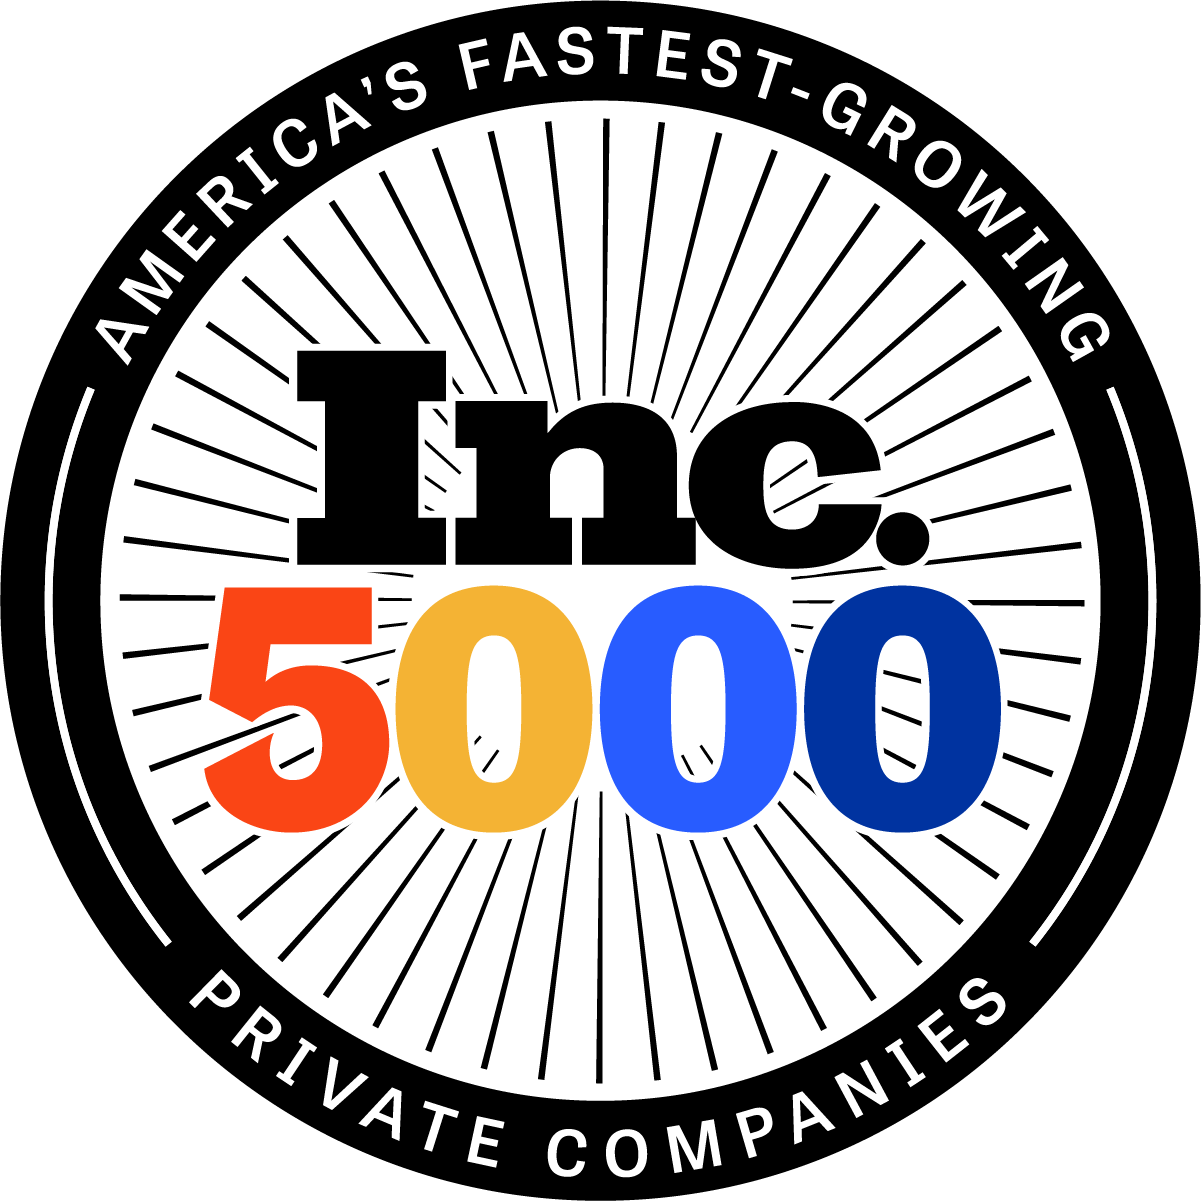 BigTime Software Named to 2022 Inc. 5000 List of Fastest Growing Companies in America